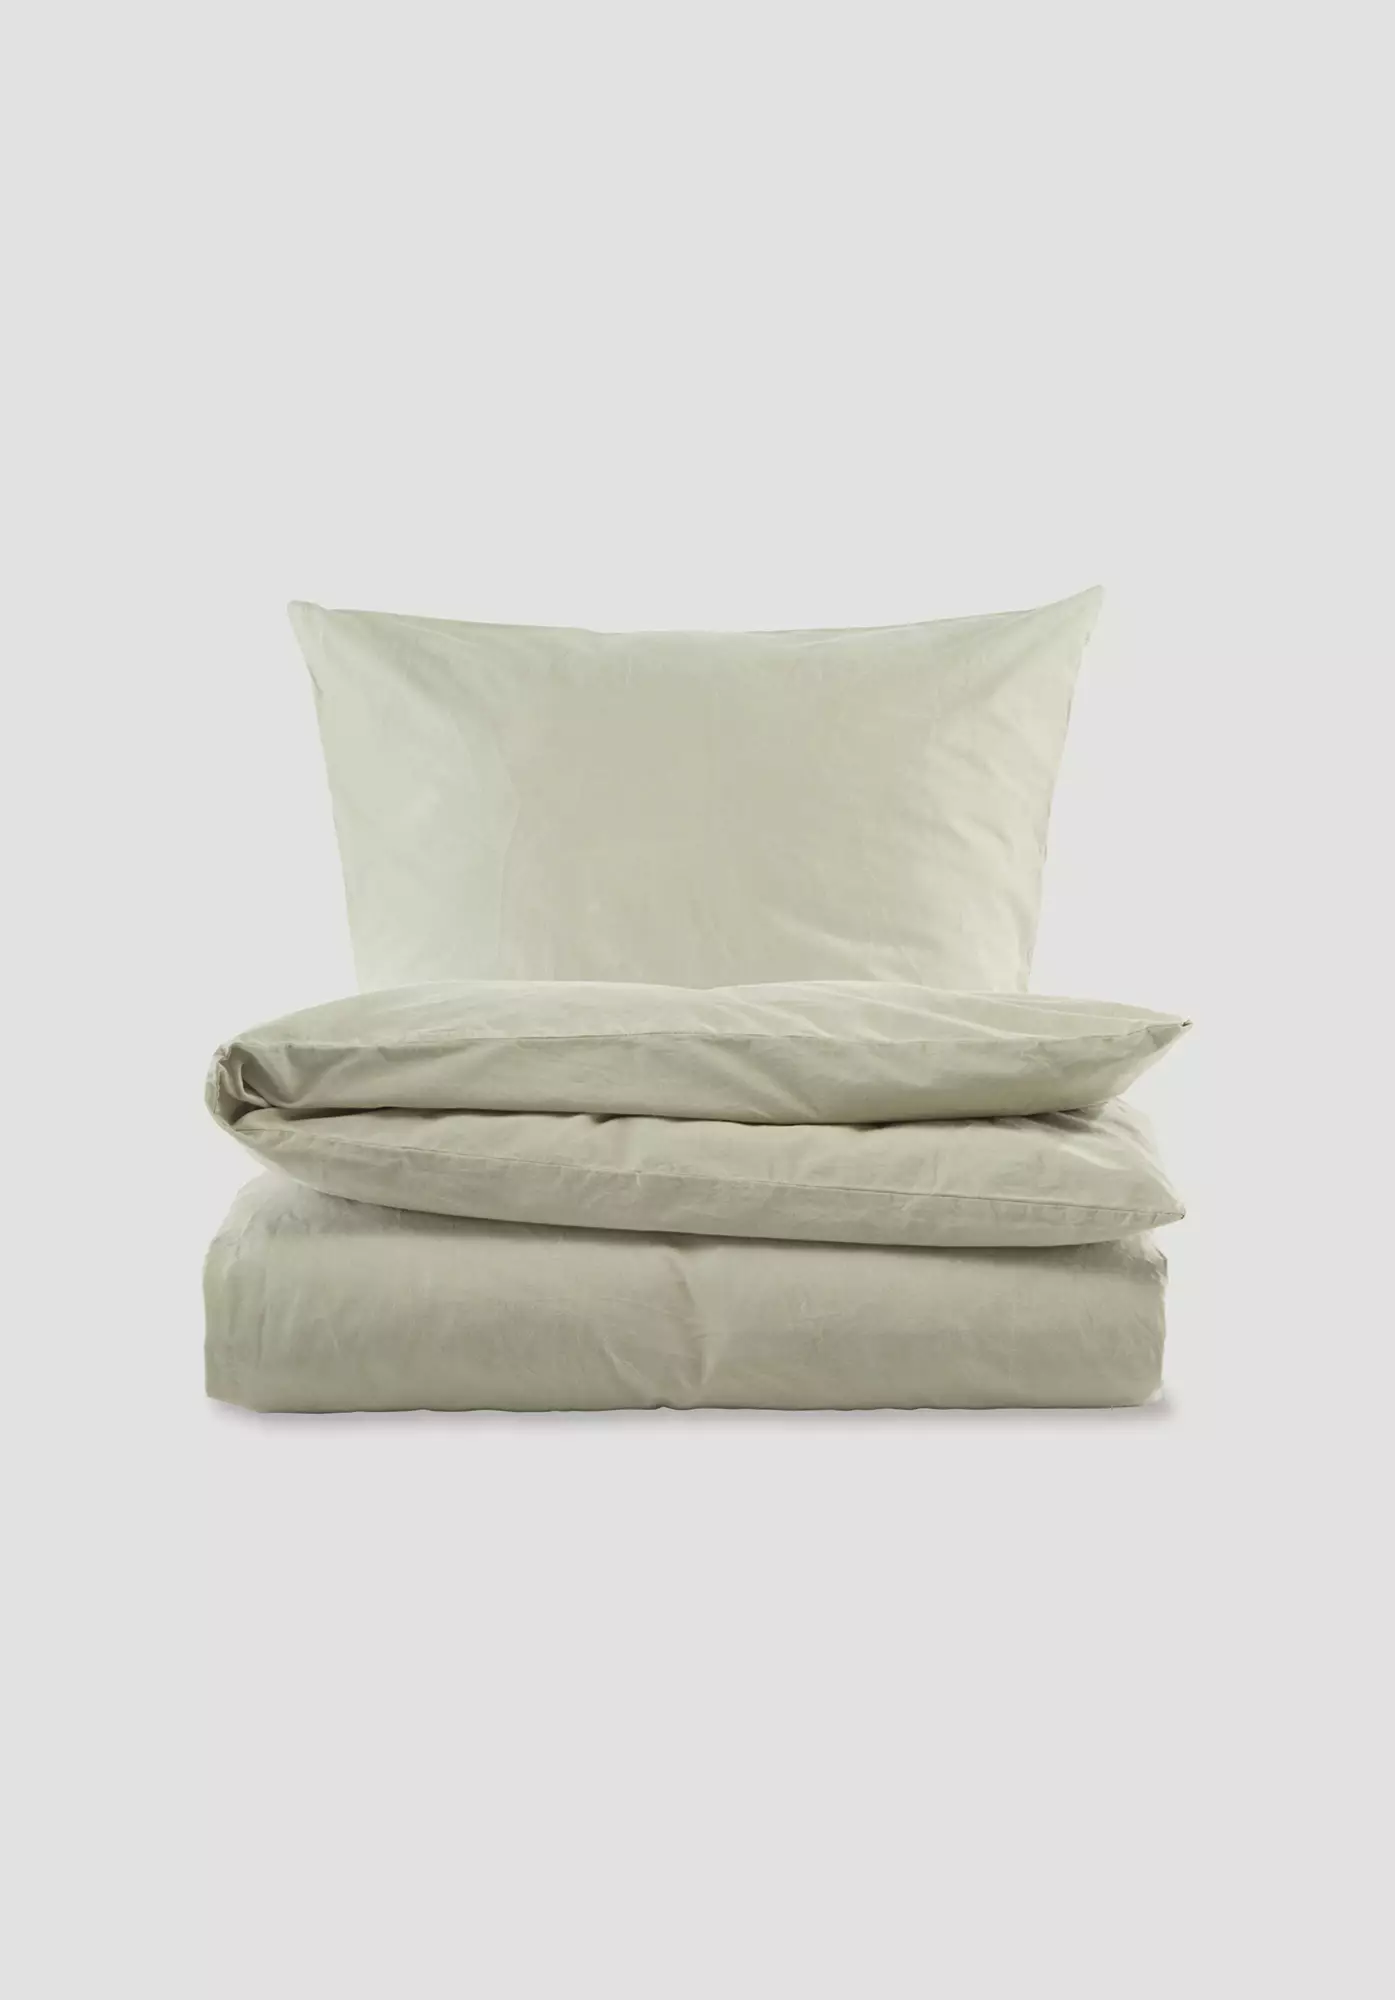 Plant-dyed Renforcé bed linen made from pure organic cotton - 2